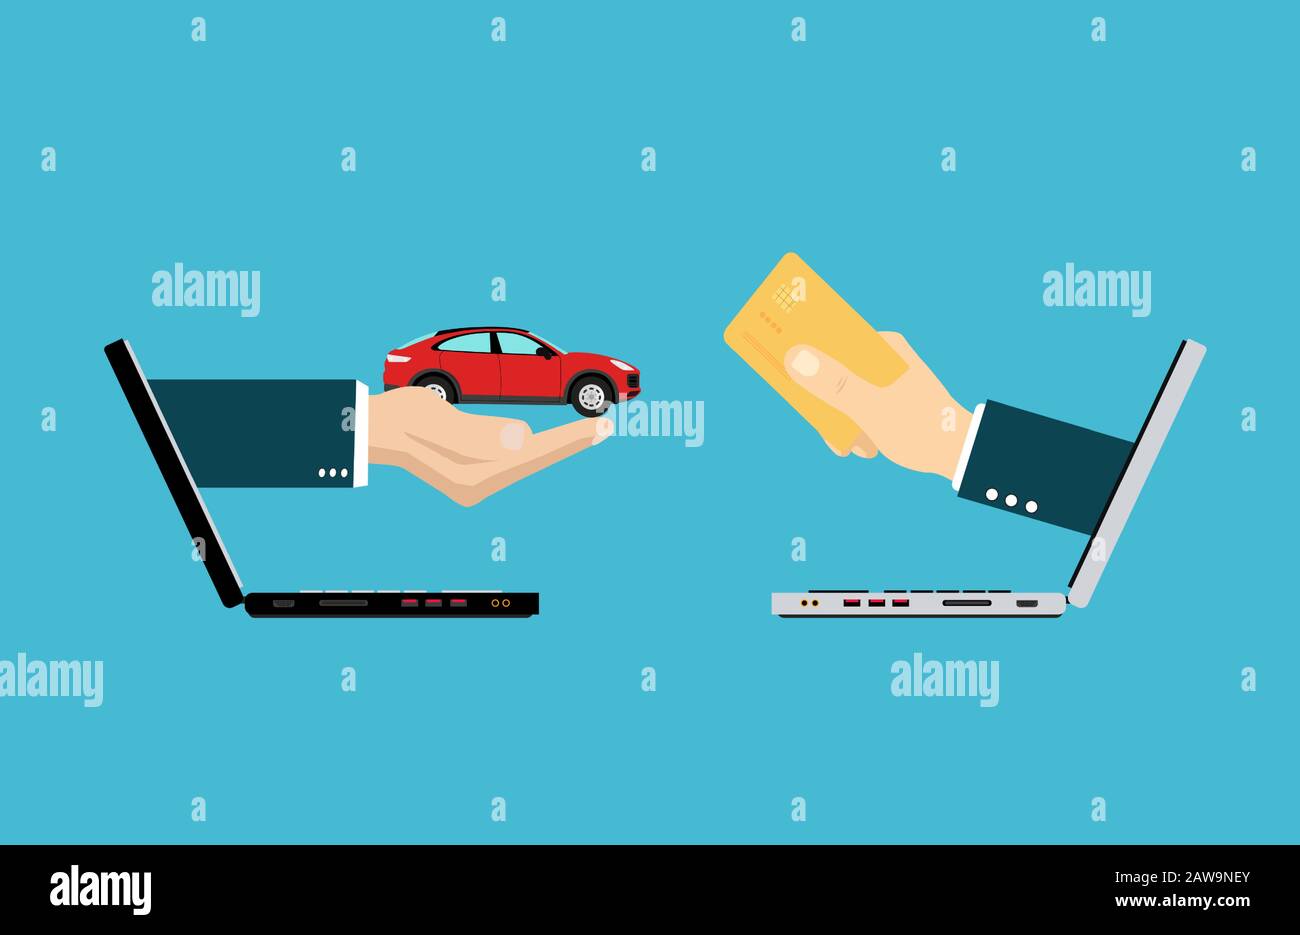 Vector of two hands coming out from laptops exchanging money for a car Stock Vector